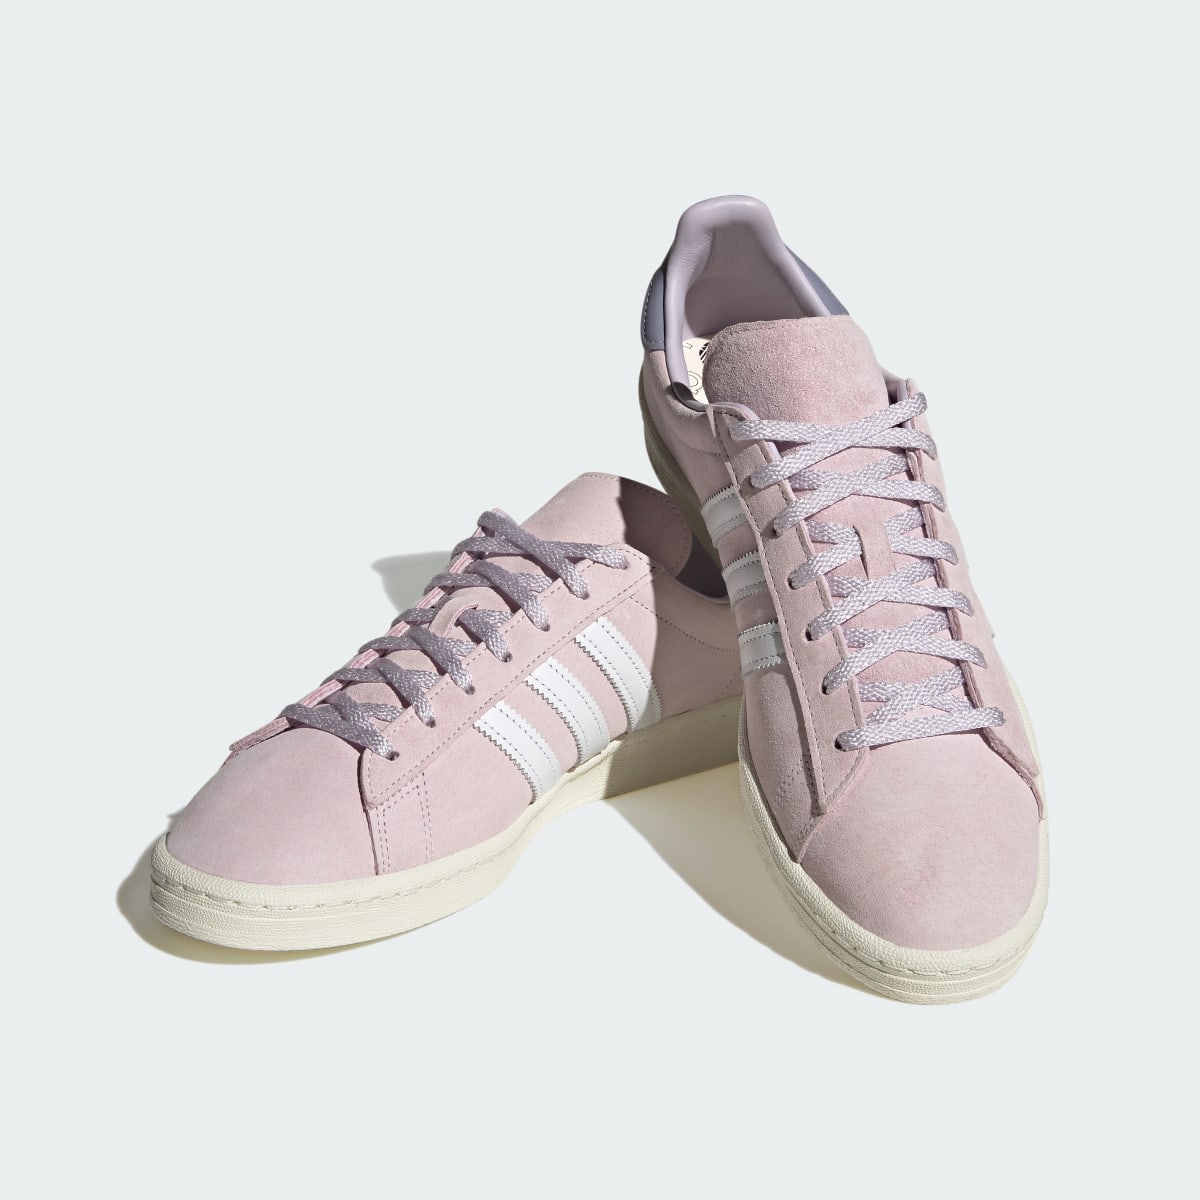 Adidas Campus 80s Shoes. 5